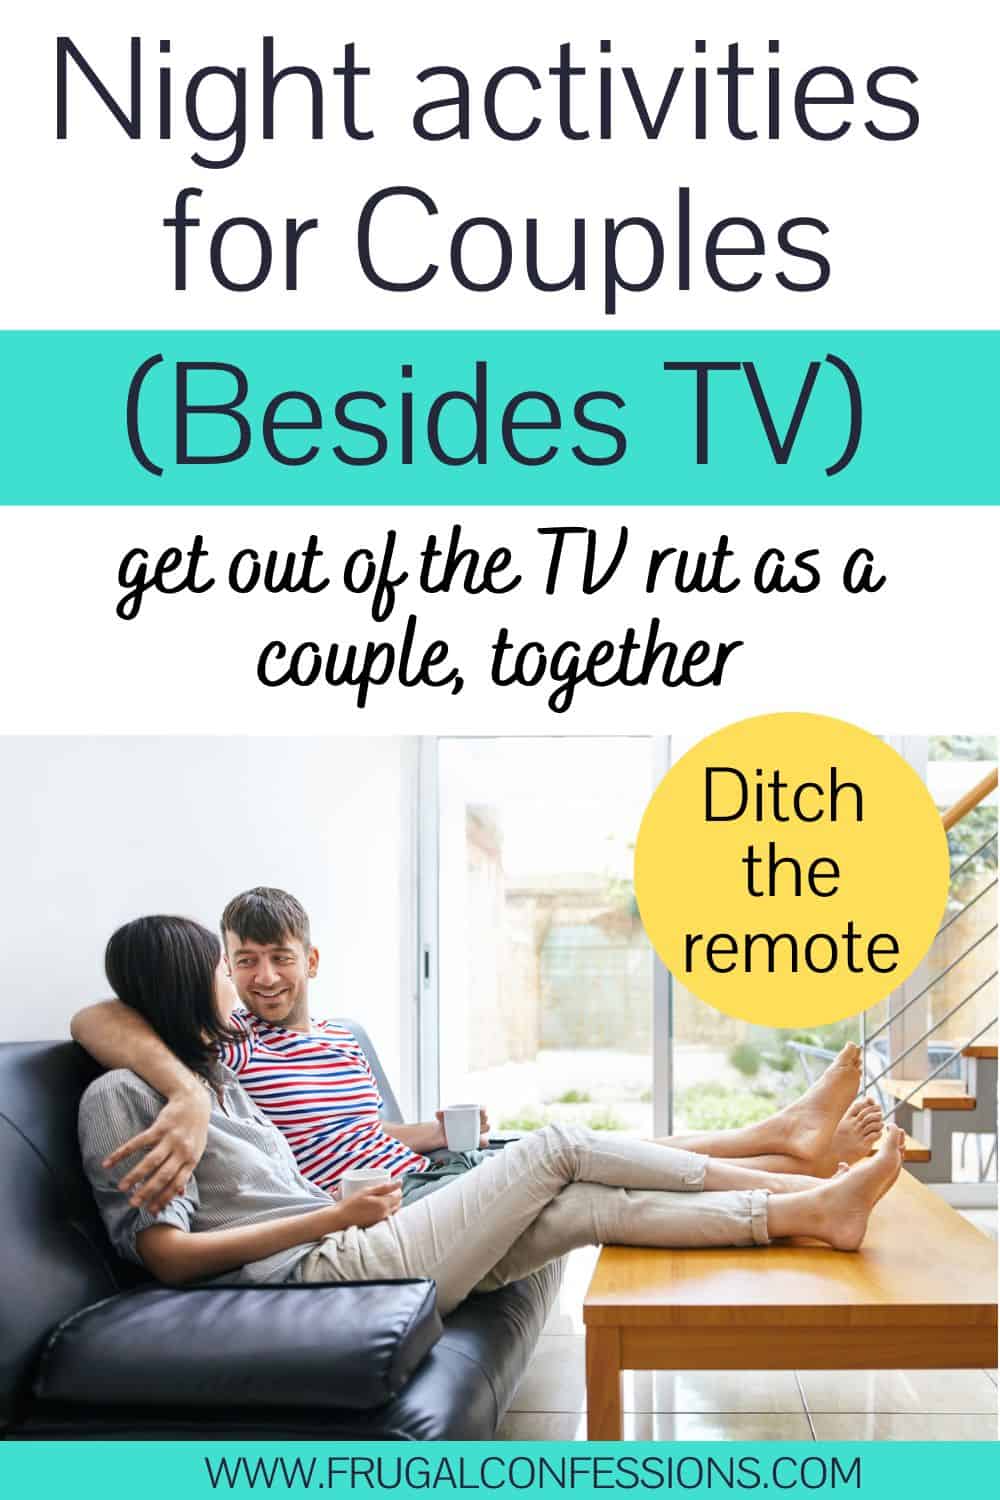 14 Things for Couples to Do Besides Watch TV (at  Night)